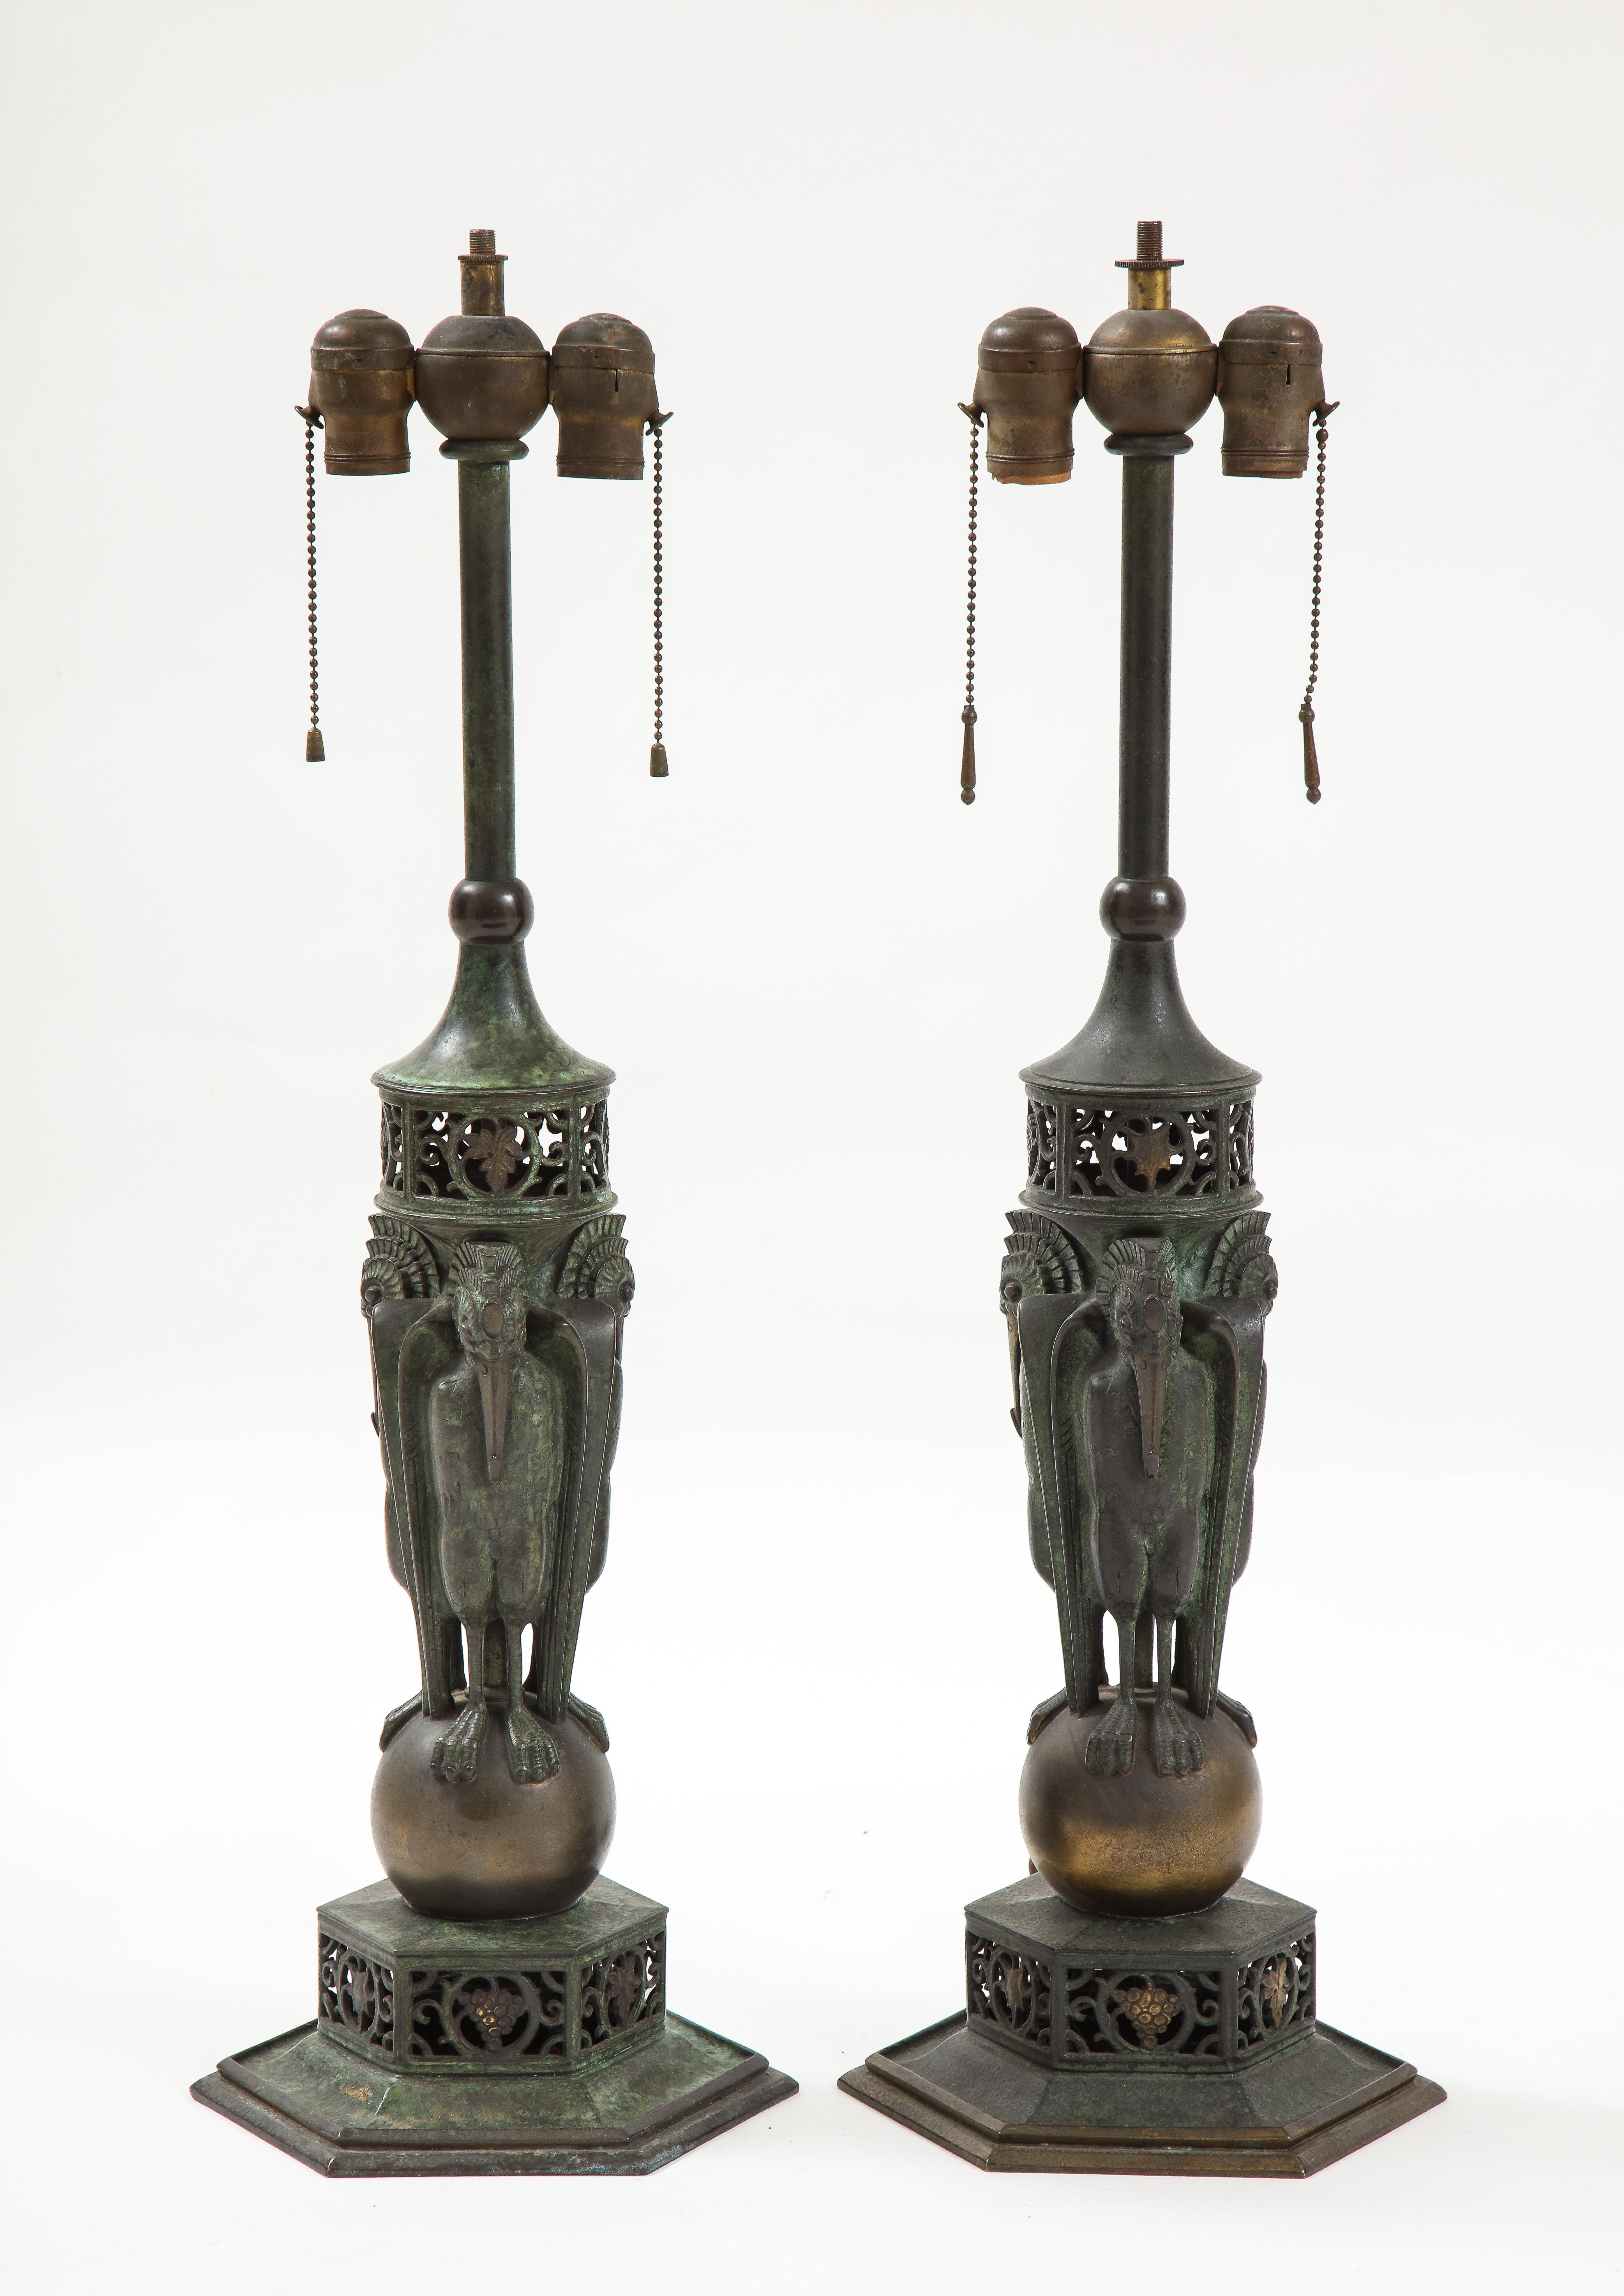 Pair of Art Deco period bronze patinated Oscar Bach table lamps, each supported by three patinated bronze storks. Oscar Bruno Bach (Breslau, Germany, 1884 - New York, NY, 1957)
German born craftsman Oscar Bruno Bach was one of the most technically